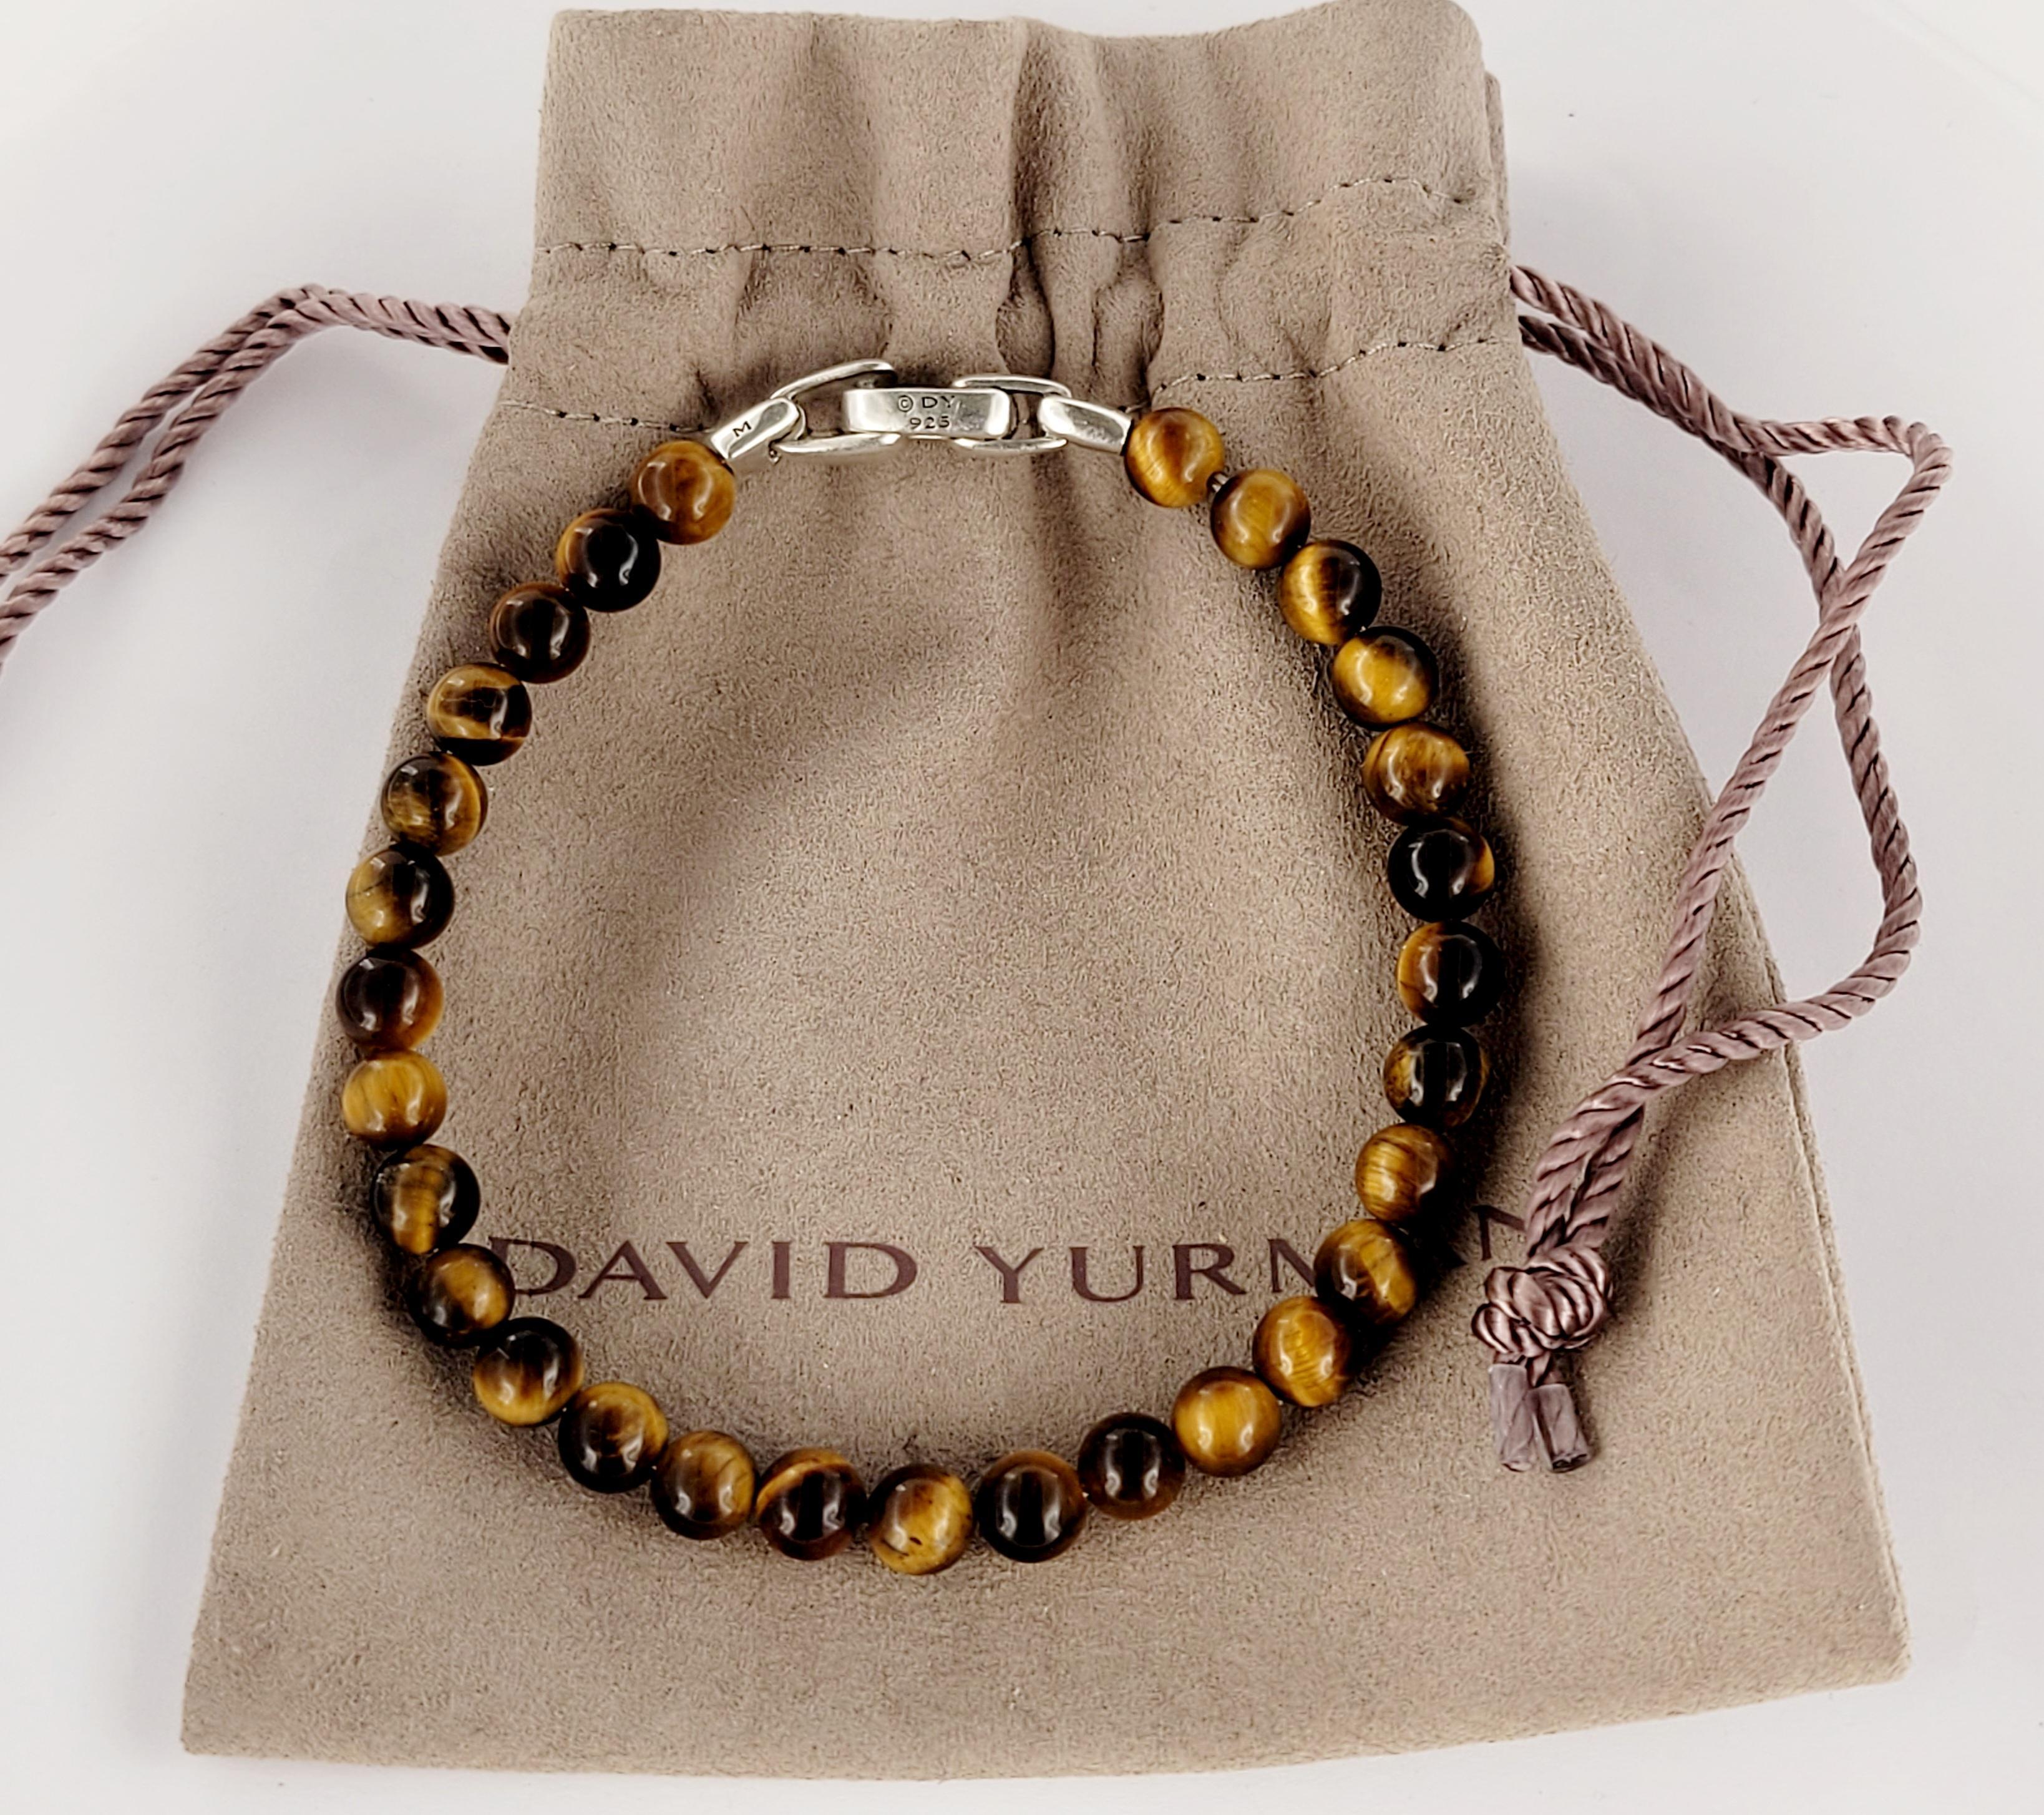 David Yurman Spiritual Bracelet
Style Tiger Eye 
Material Sterling Silver 
Metal Purity 925
Bracelet 6.5mm
Bracelet Length 8.5'' from end to end 
Weight 13.5gr 
Gender Men's 
Condition New, never worn
Comes with David Yurman Pouch